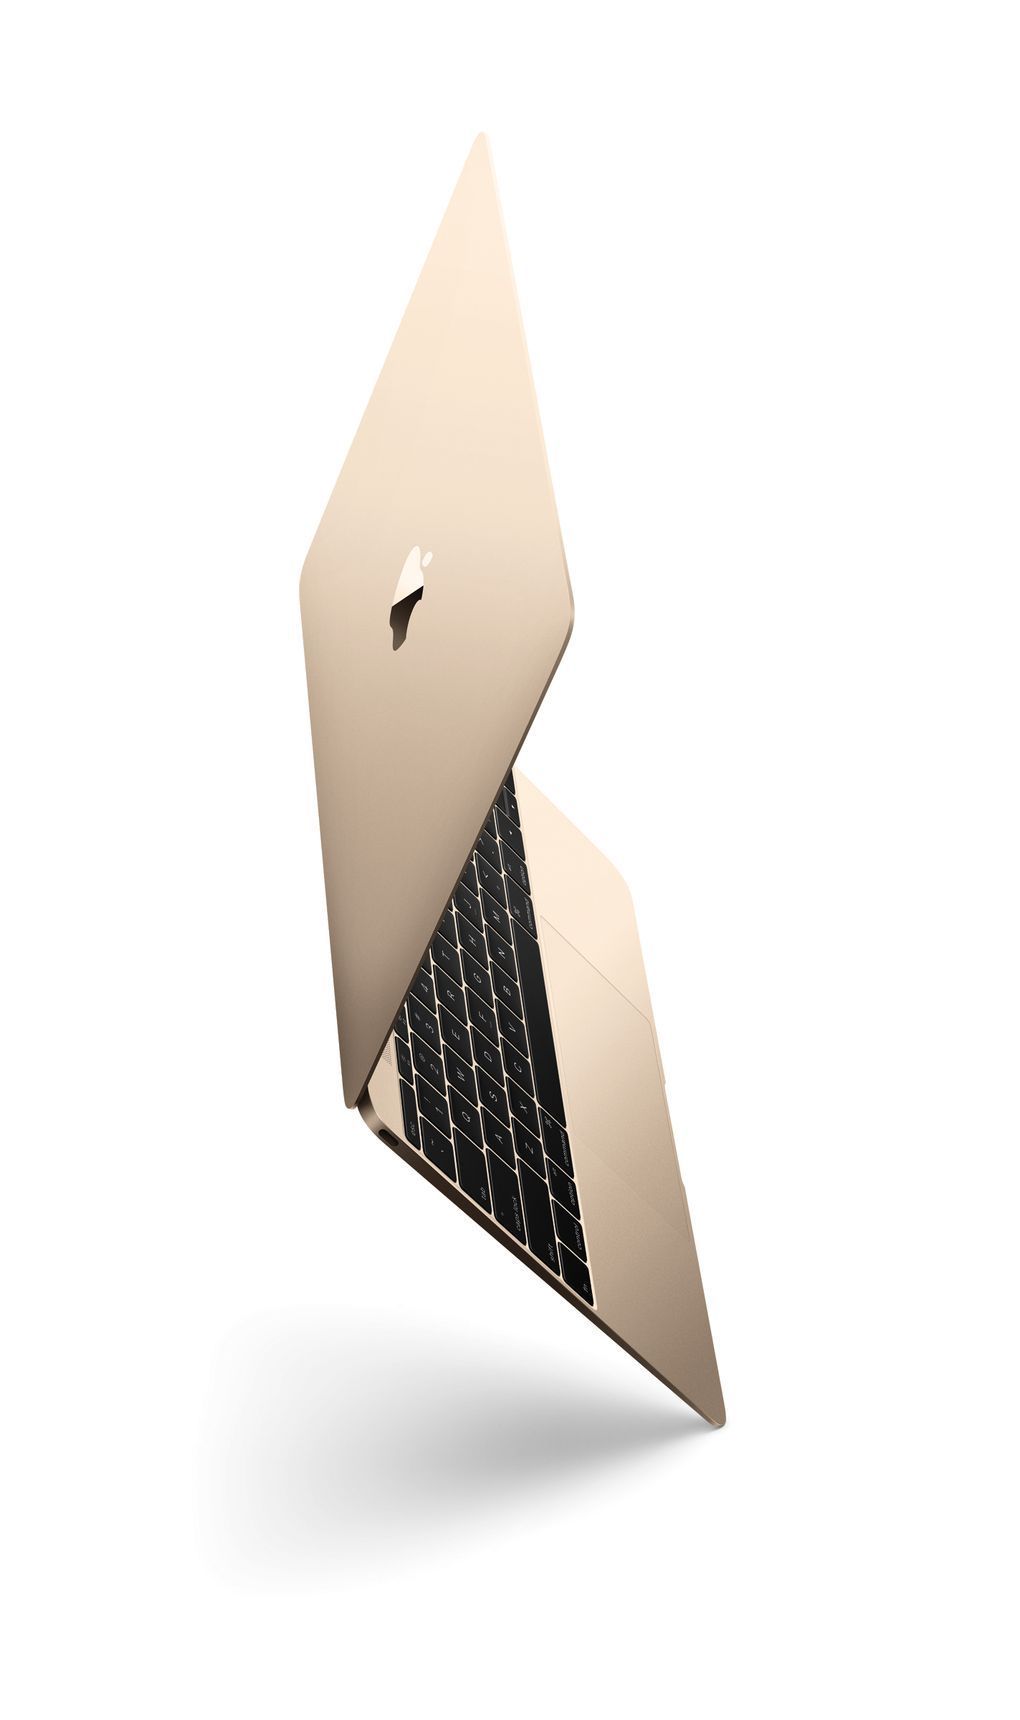 WANT!!! The new gold MacBoo